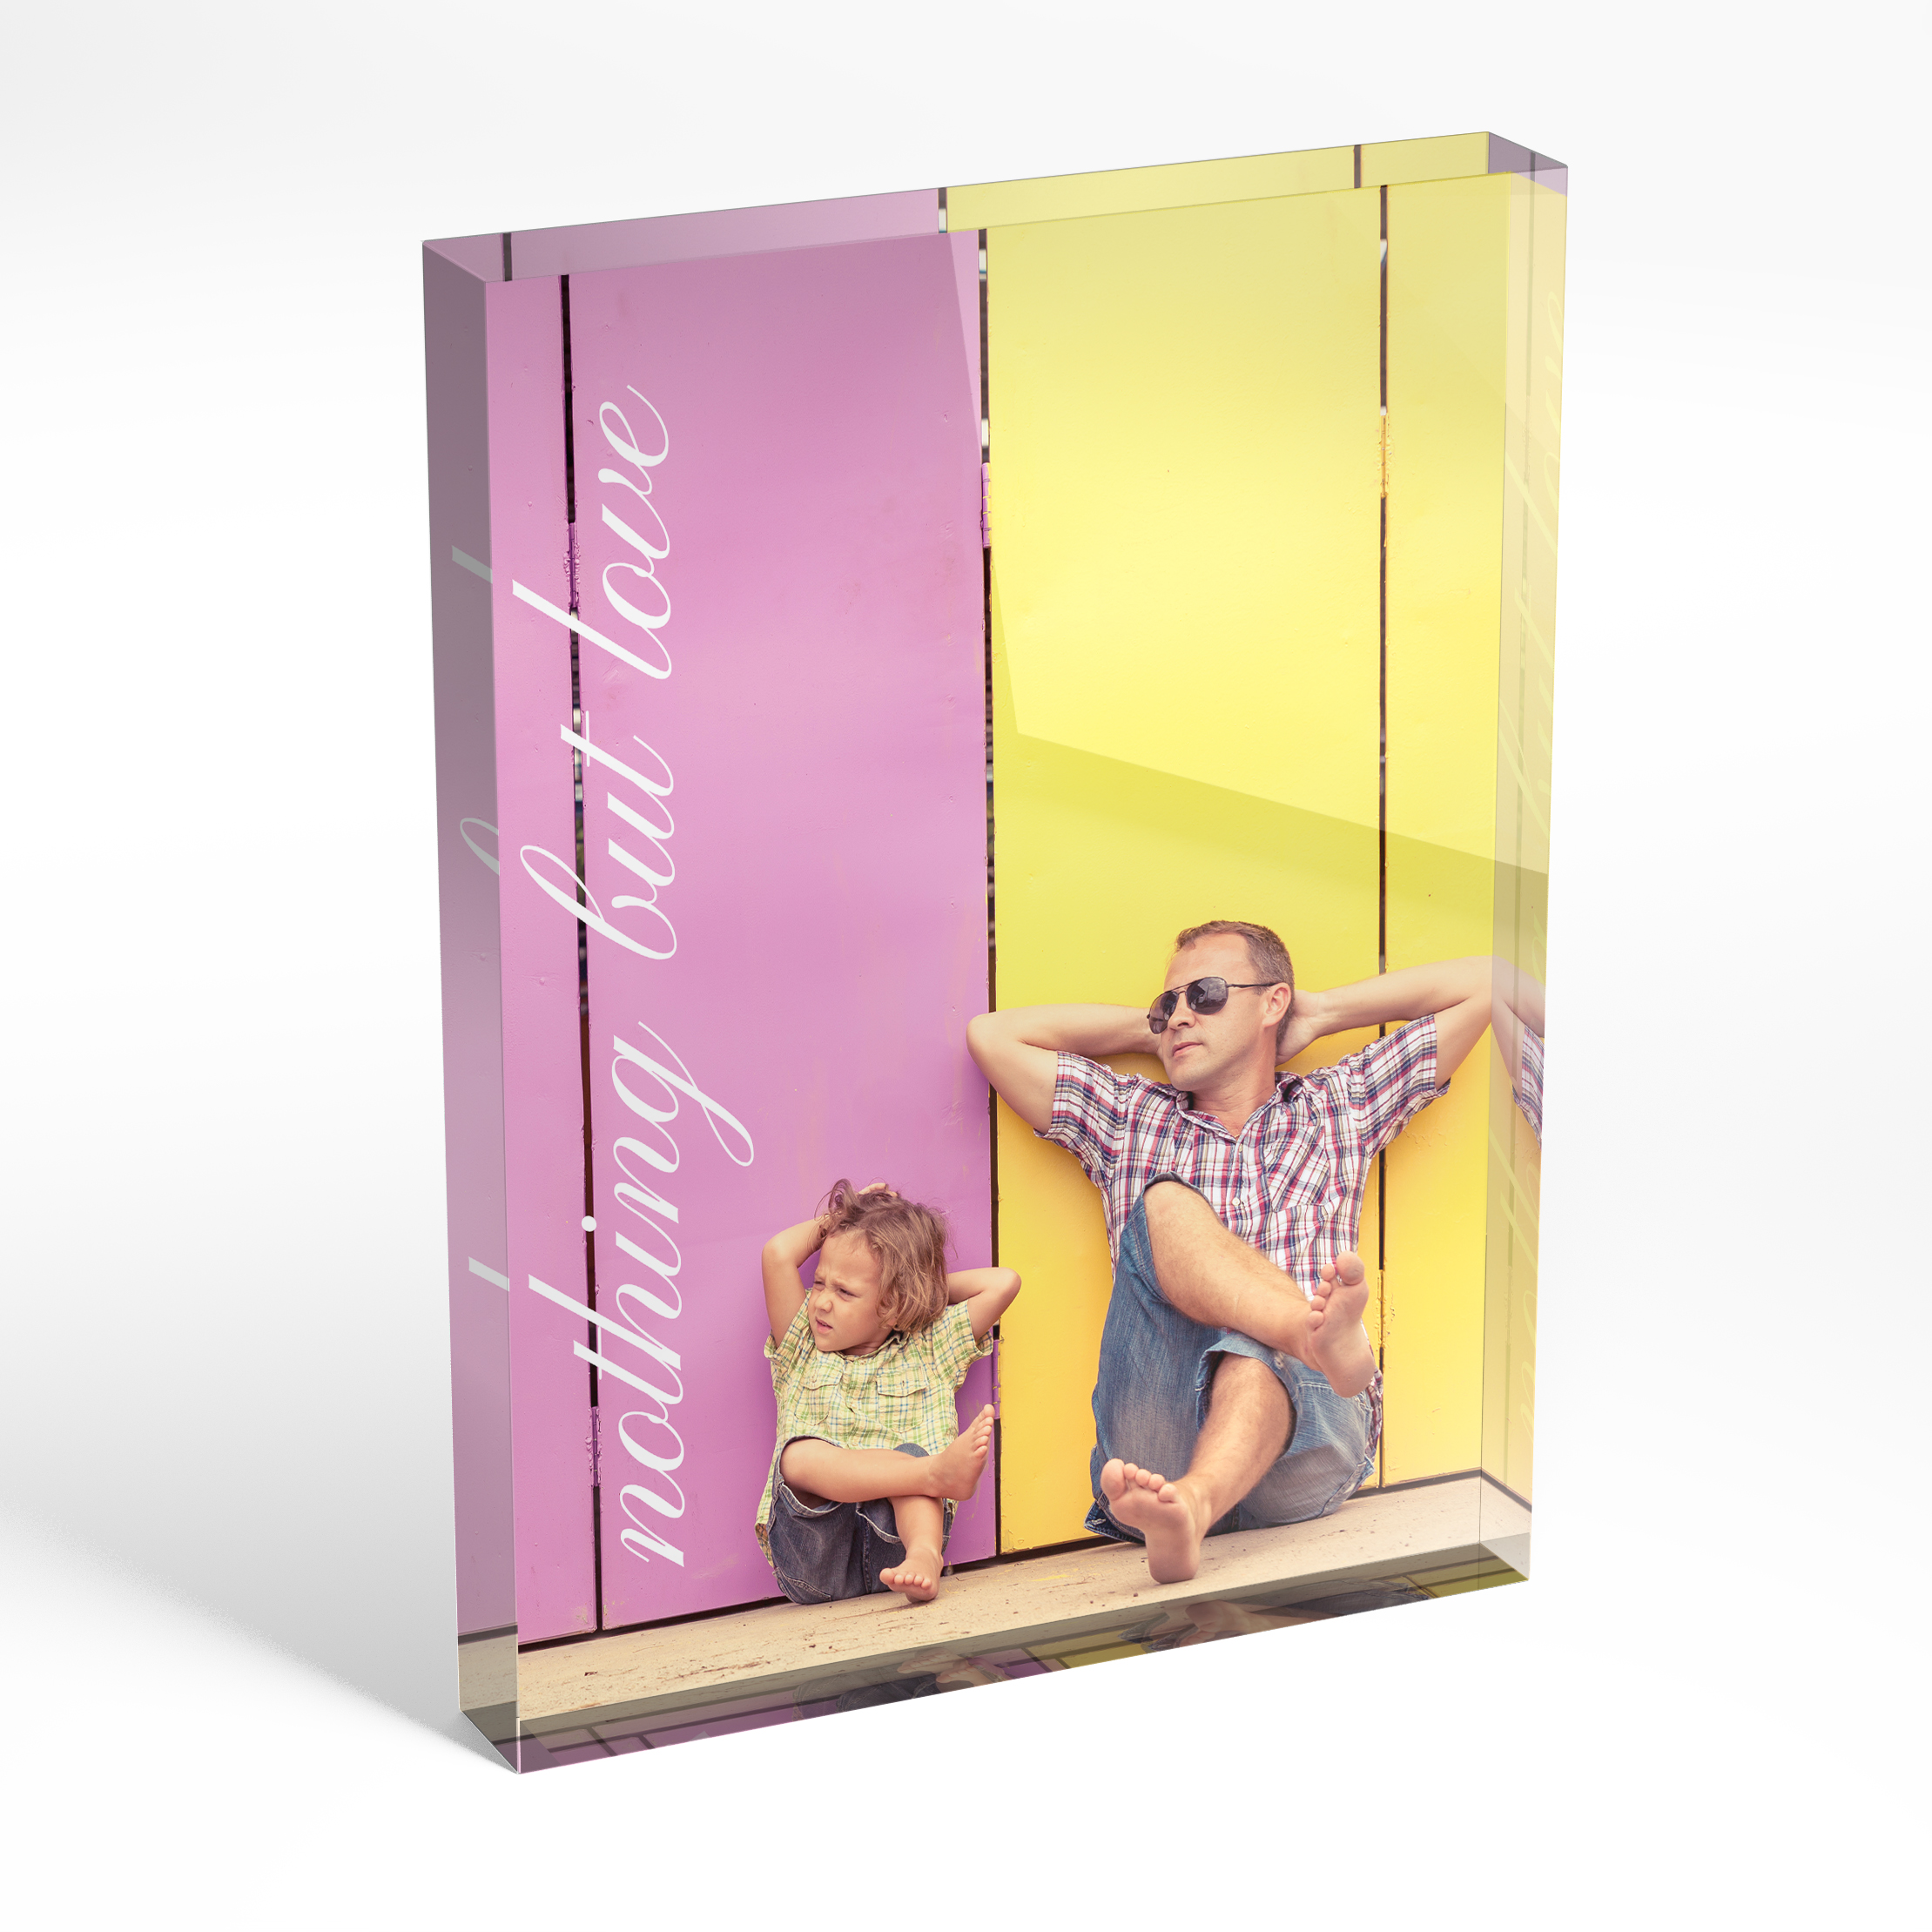 An angled side view of a portrait layout Acrylic Glass Photo Block with space for 1 photo. Thiis design is named "Nothing but Love". 